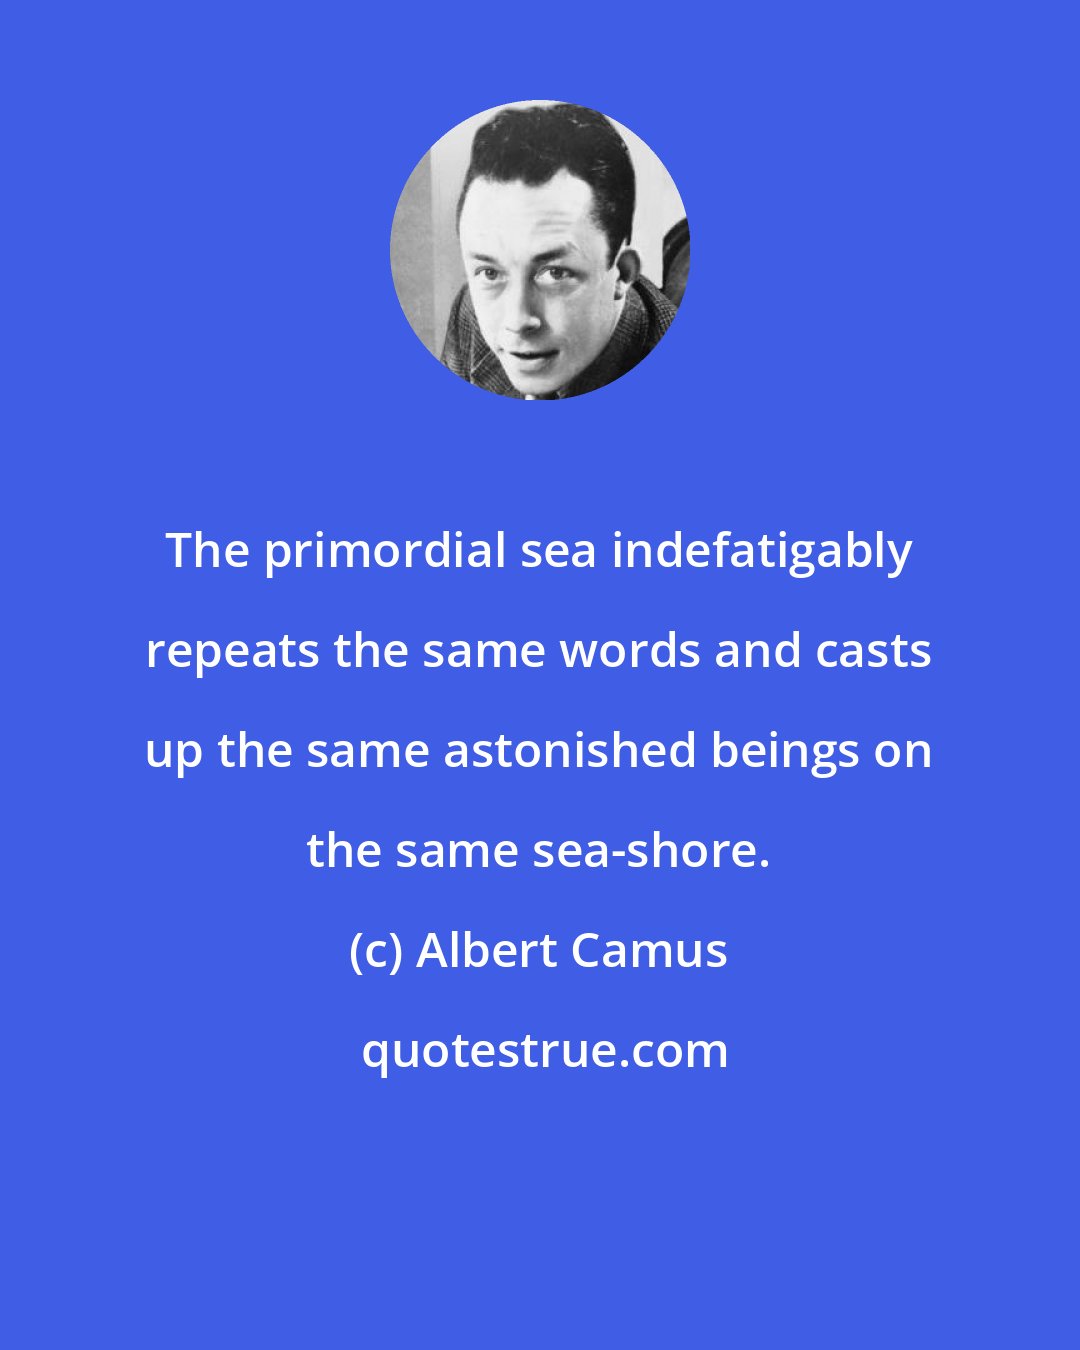 Albert Camus: The primordial sea indefatigably repeats the same words and casts up the same astonished beings on the same sea-shore.